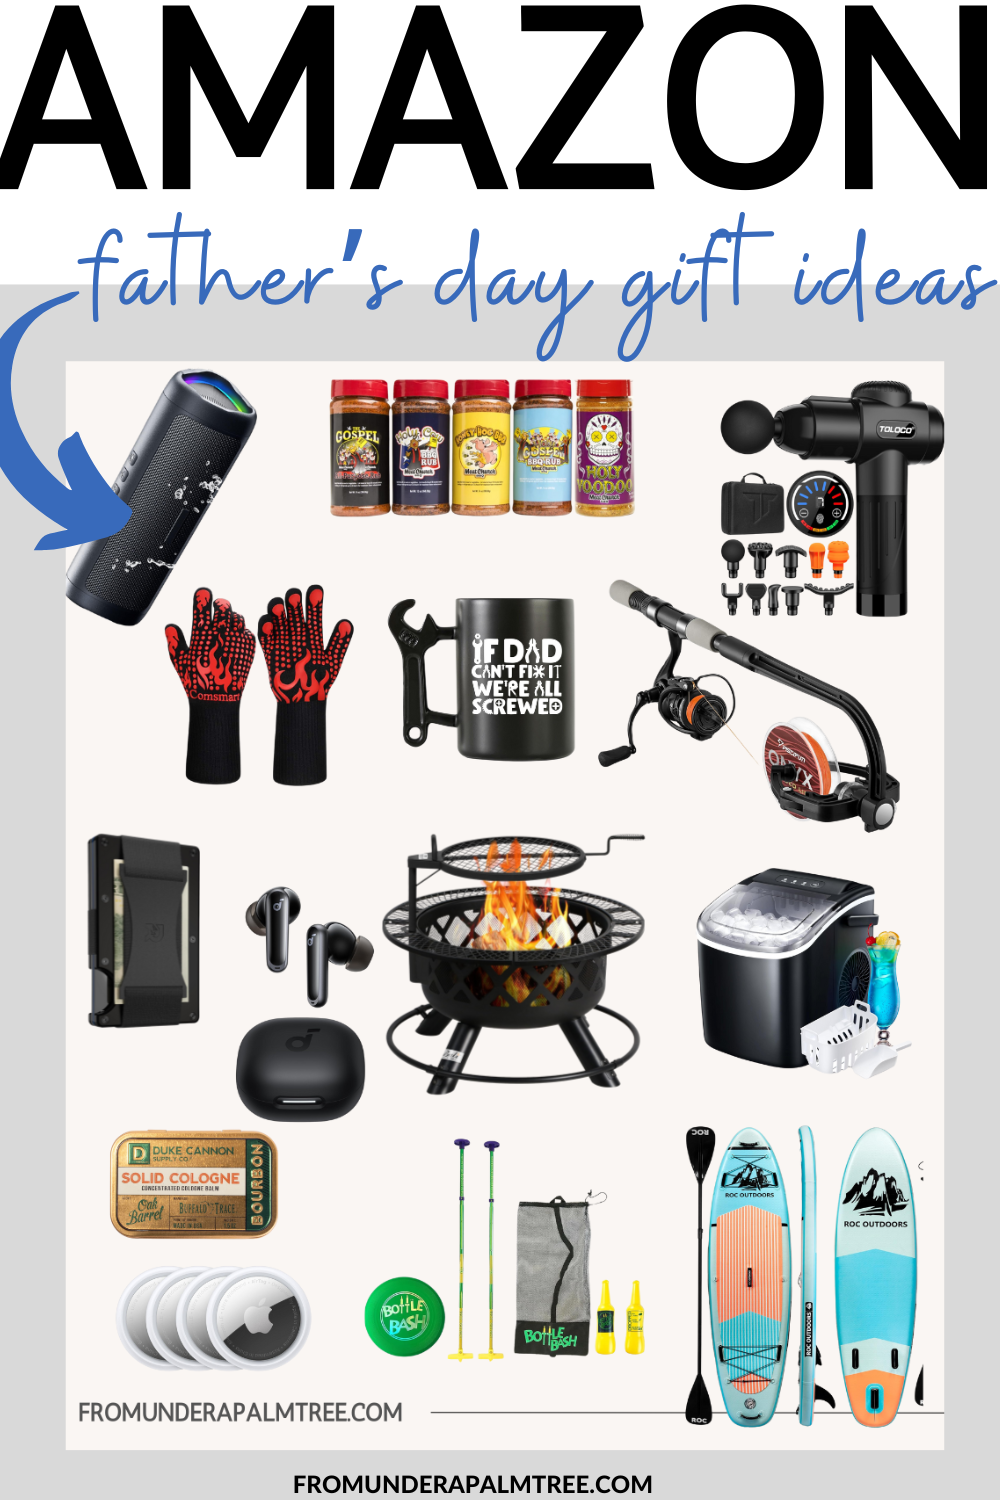 creative fathers day gift ideas | dads | fathers | Fathers Day | fathers day 2024 | fathers day gift ideas | fathers day gifts | fathers day gifts from adults | gift guide for dads | gifts | gifts for dad who wants nothing | gifts for dads | gifts for father in law | last minute fathers day gifts | meaningful fathers day gift ideas | most popular fathers day gift | personlized fathers day gifts | simple fathers day gift ideas | what to get dad for fathers day | the best gifts for dads | fathers day gifts for boyfriend | fathers day gift ideas from wife | fathers day gift ideas from daughter | personalized fathers day gifts | fromunderapalmtree | Family | lifestyle blogger | lifestyle blog | holidays | 